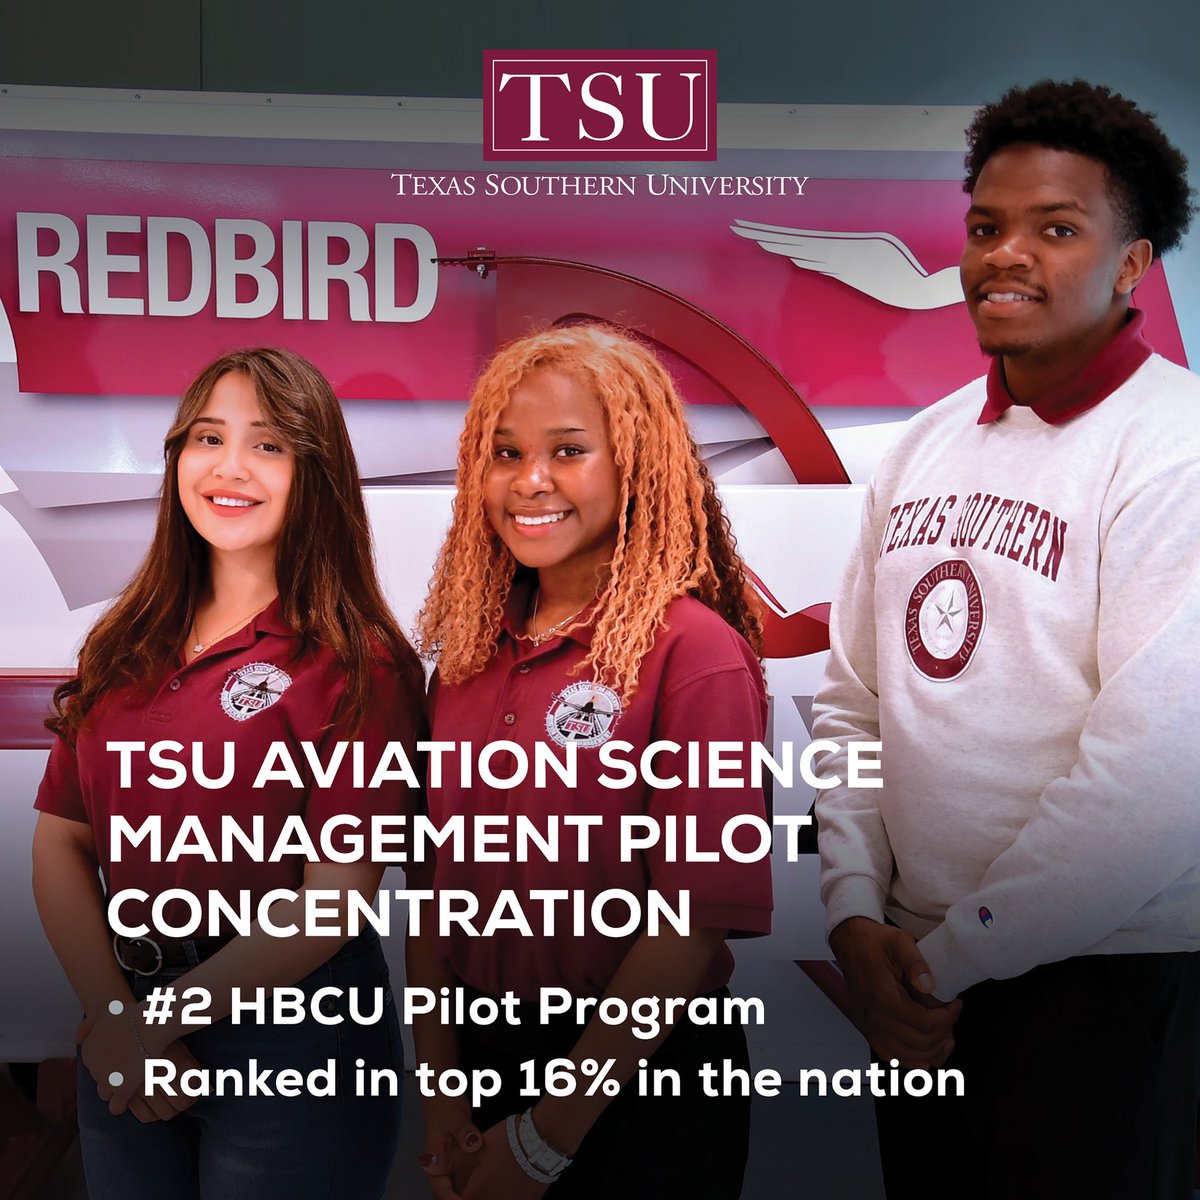 ✈️We’re thrilled to announce that our Aviation program has been ranked as the #2 HBCU Pilot program and is in the top 16% nationally, according to pilot-colleges.com! Join us in celebrating this milestone and our commitment to excellence in aviation education! #TSUProud